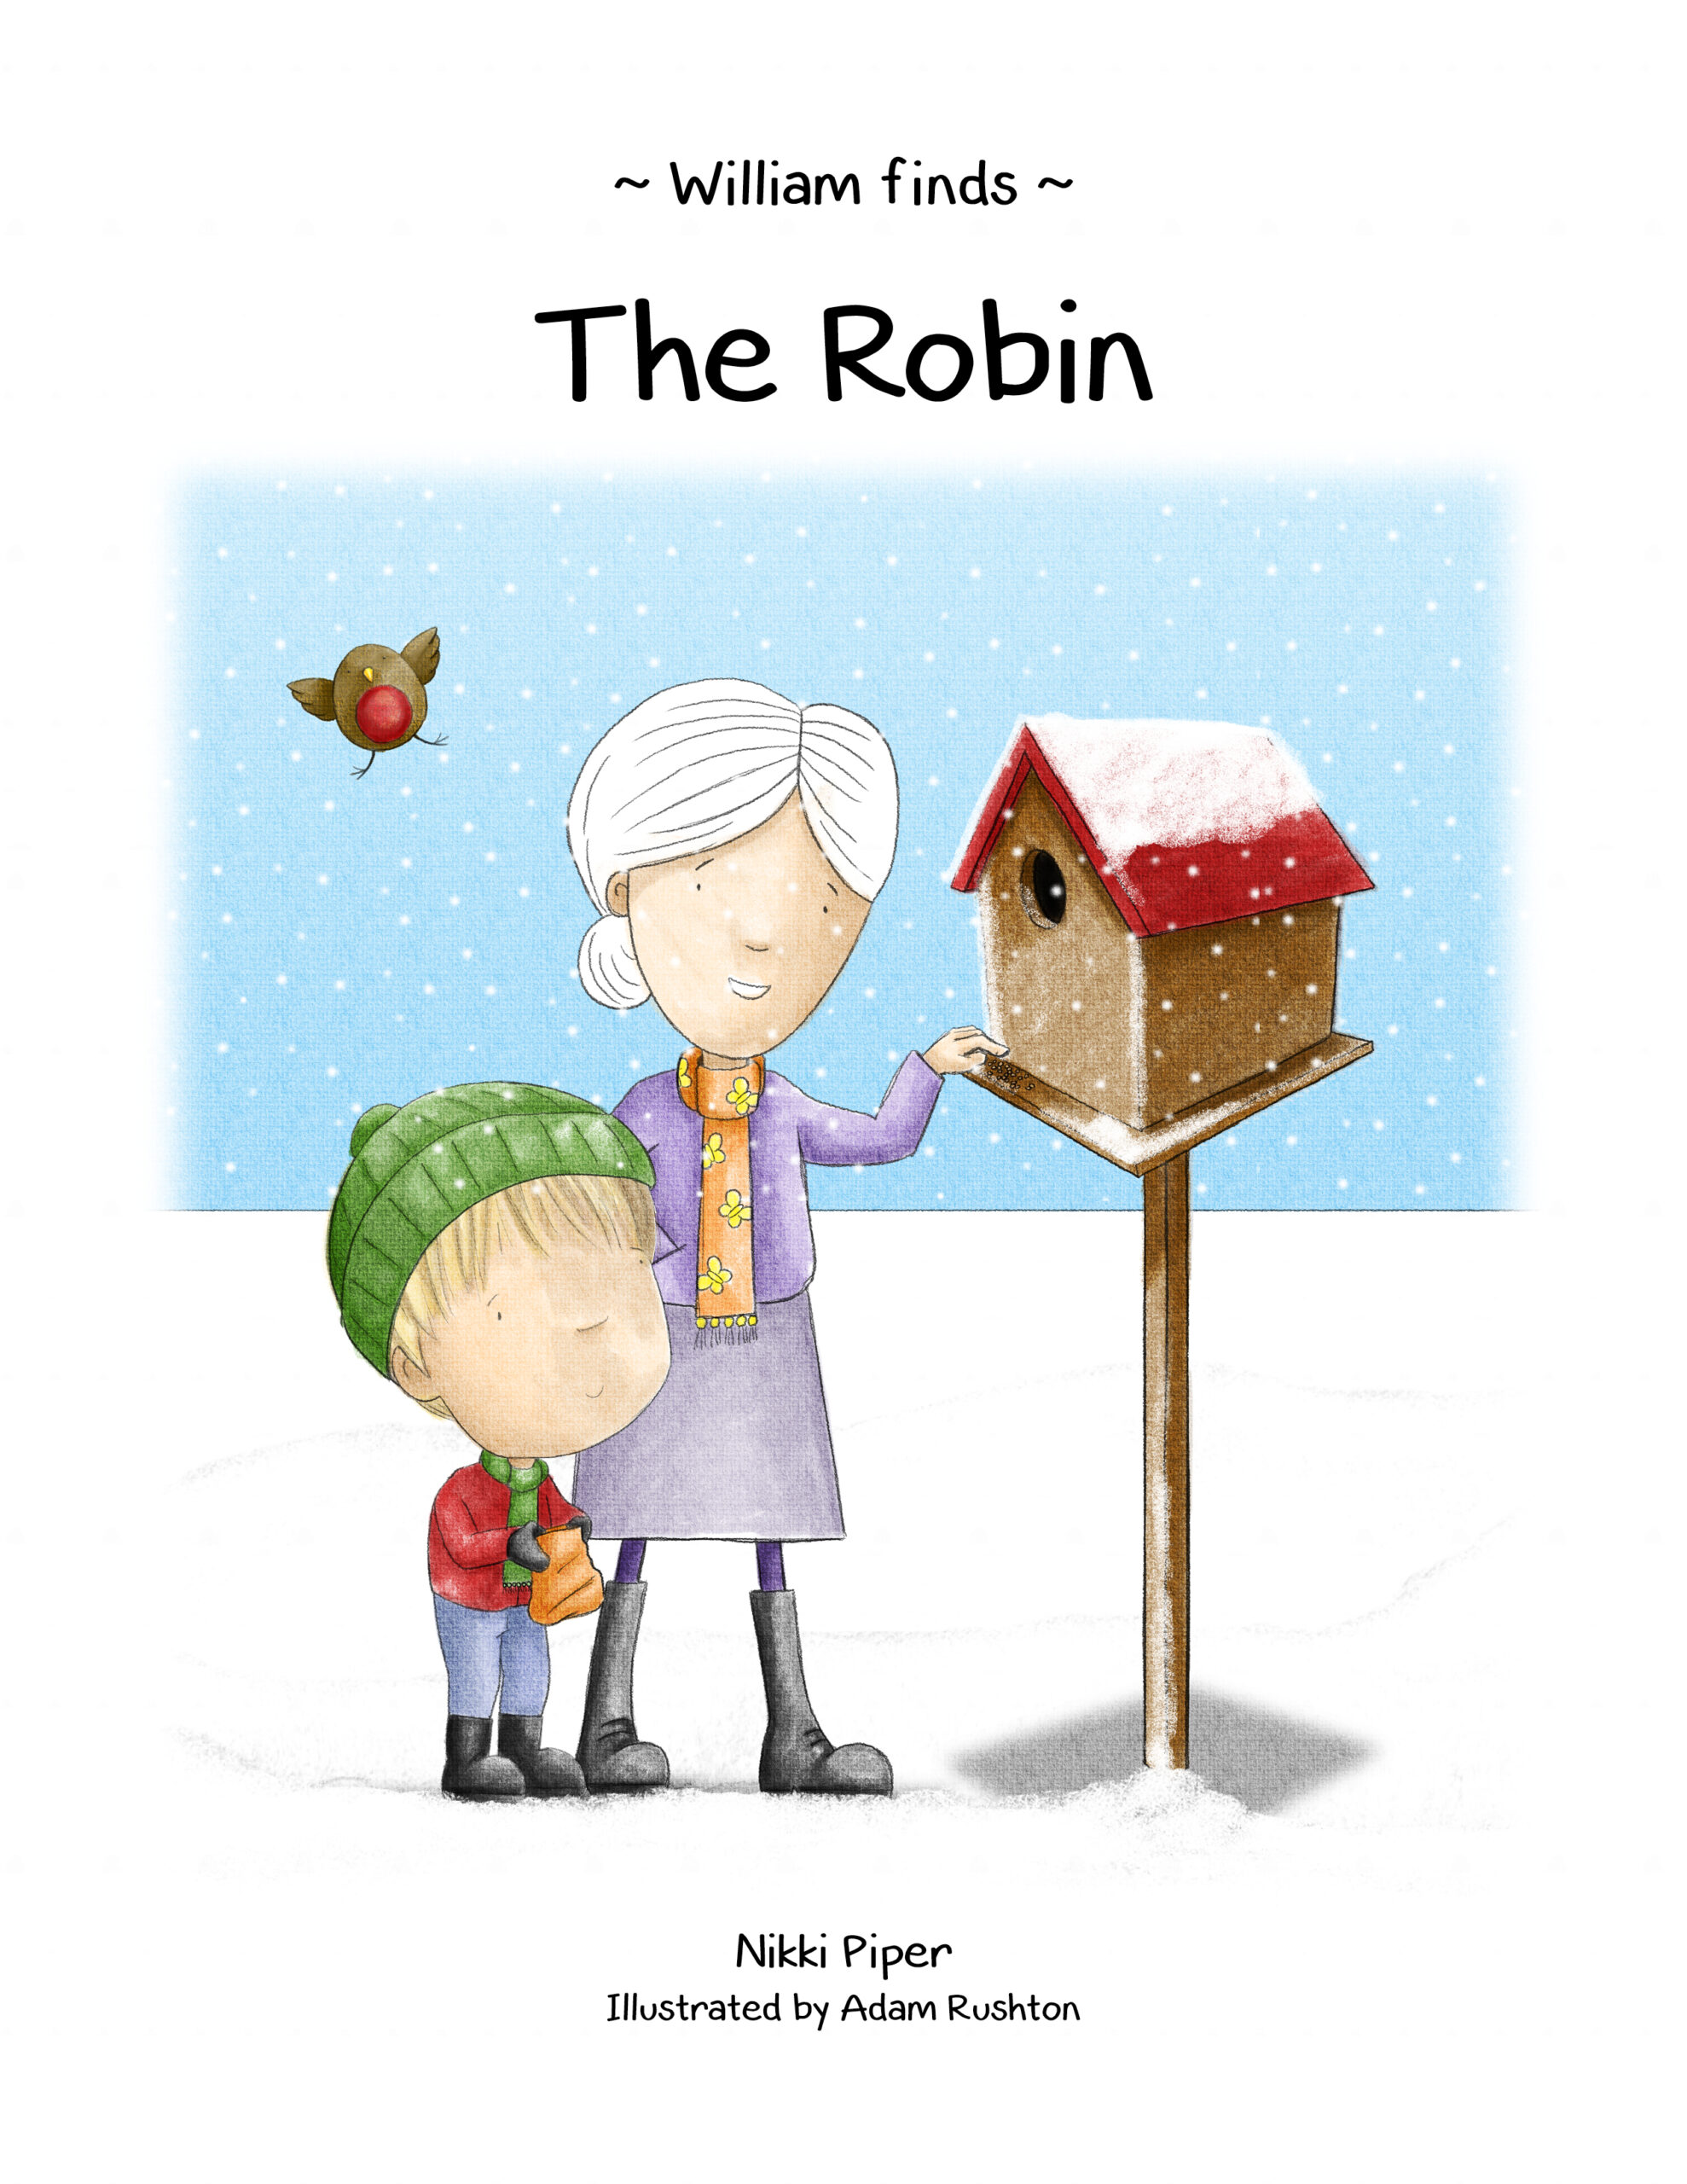 William Finds 'The Robin' book cover